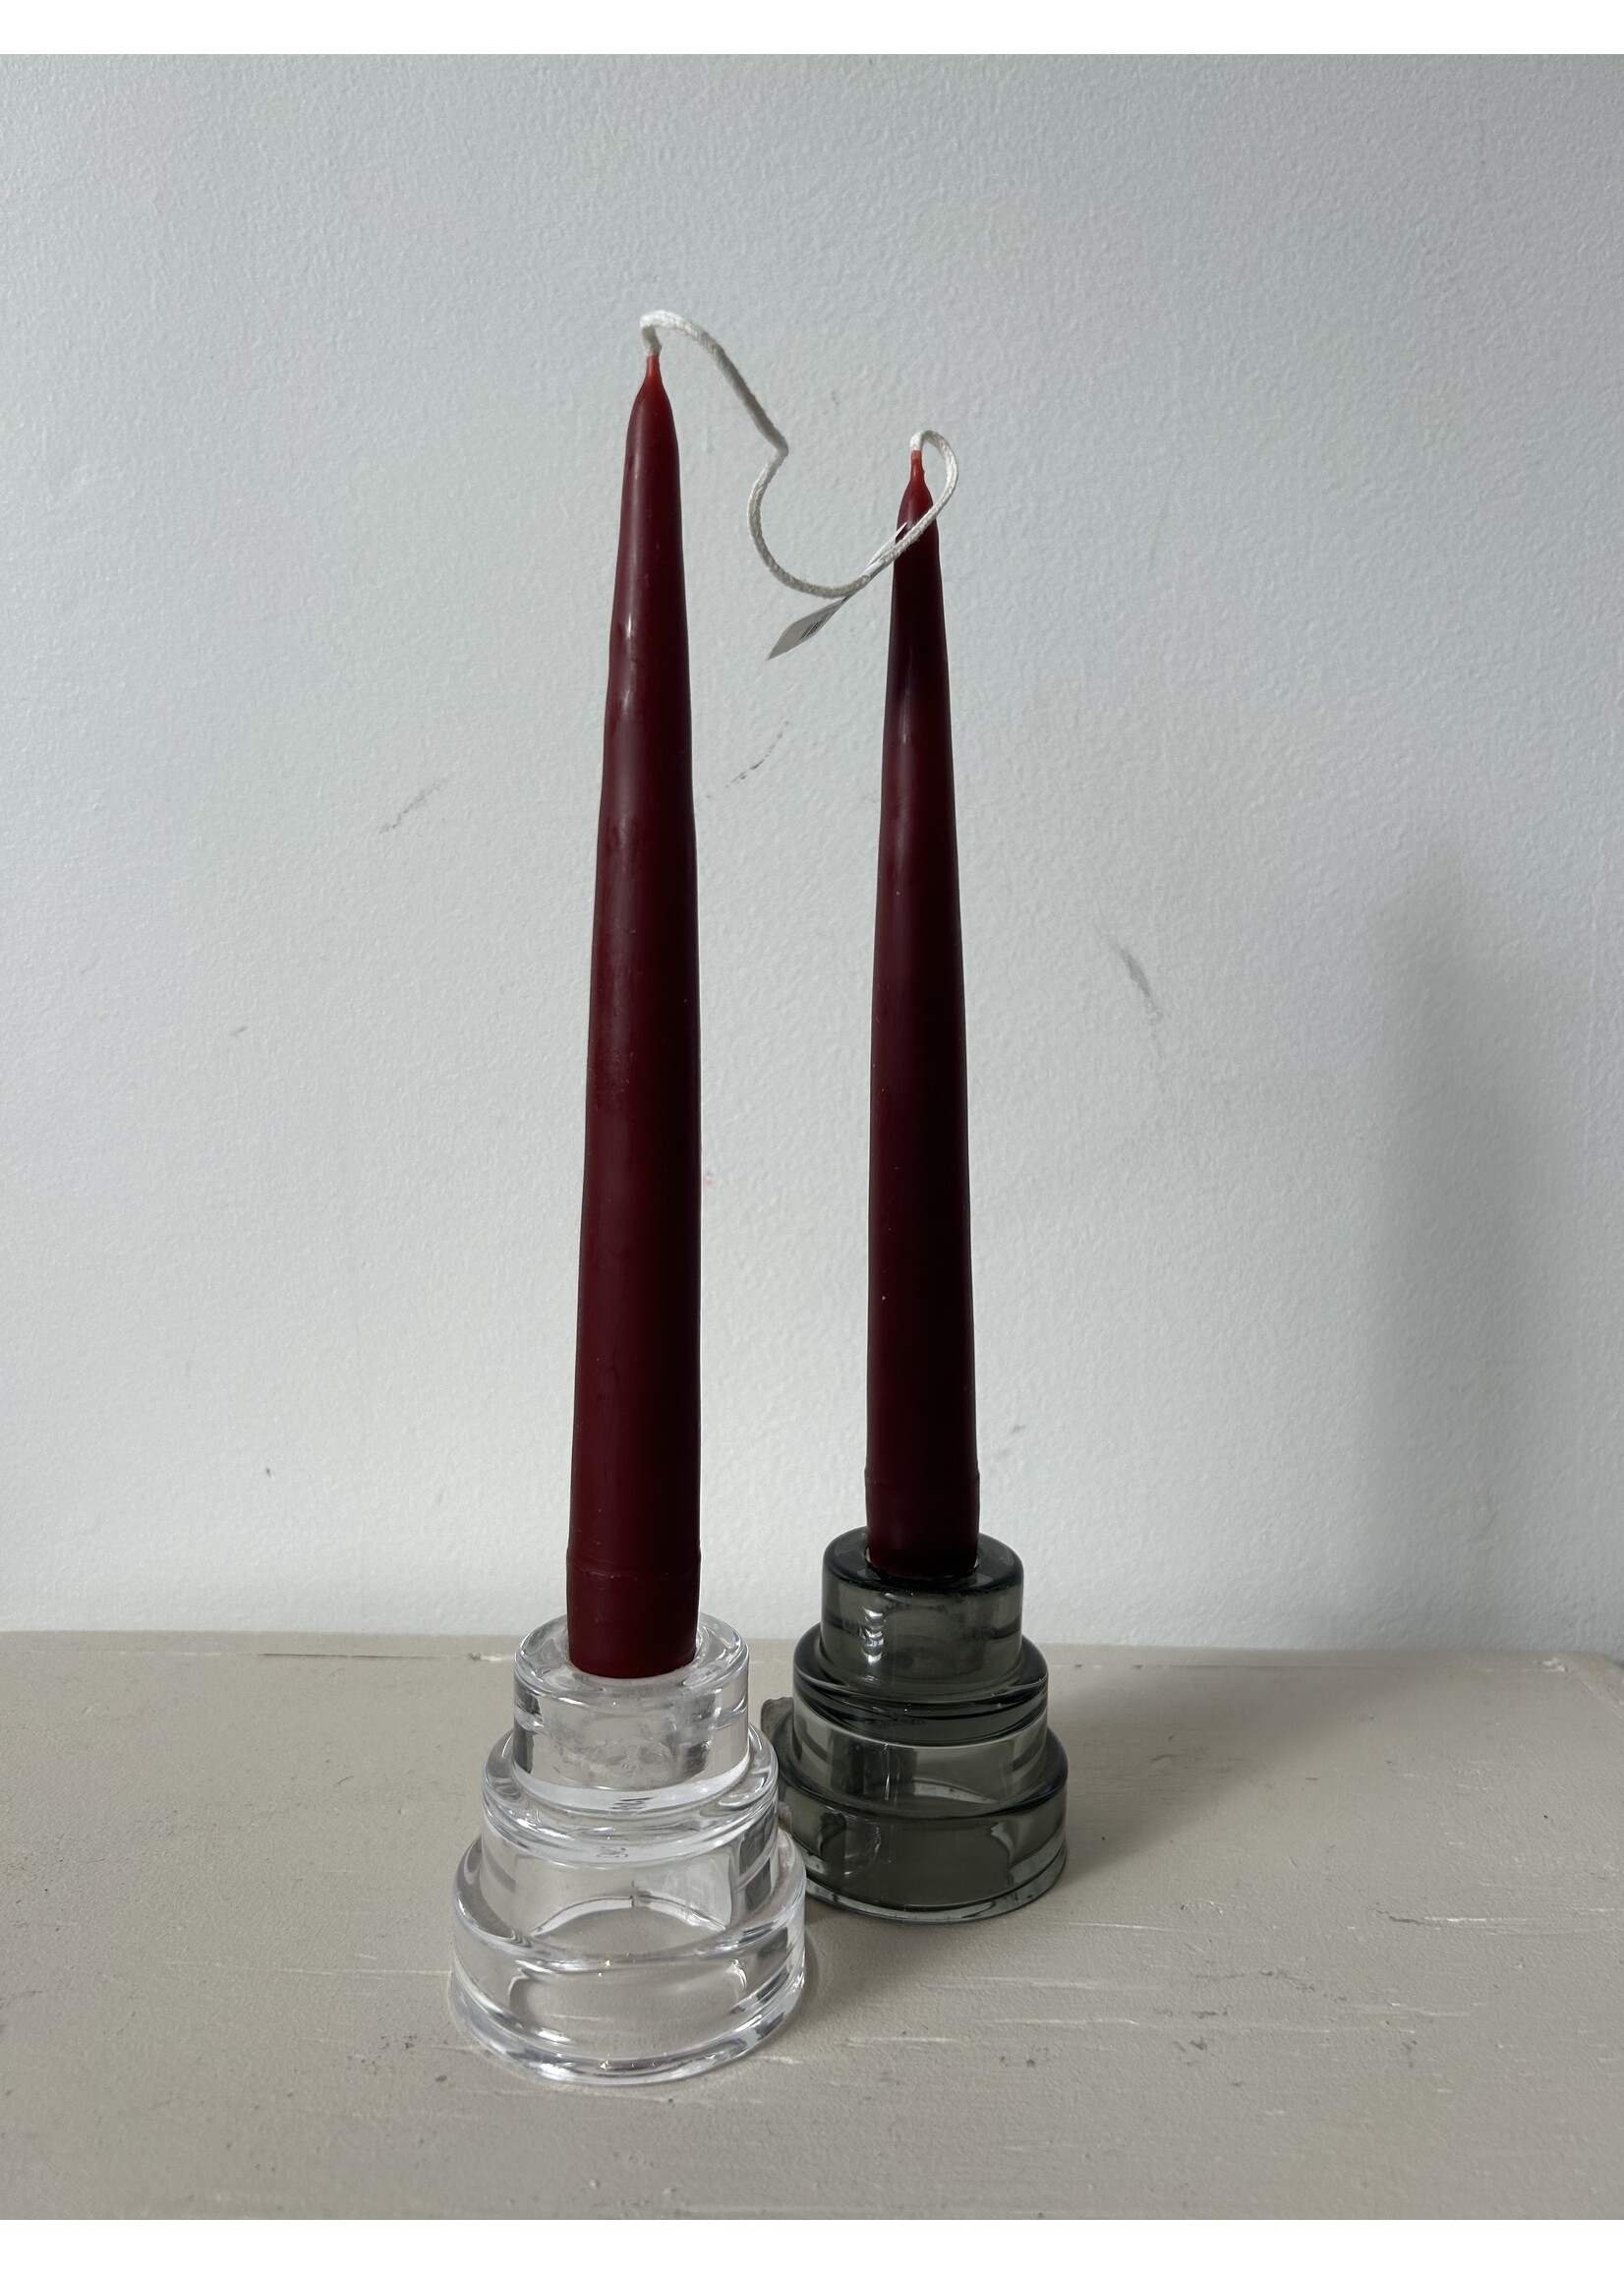 Danica Design Candles Candle pairs " Taper Medium" by Danica Design Candles